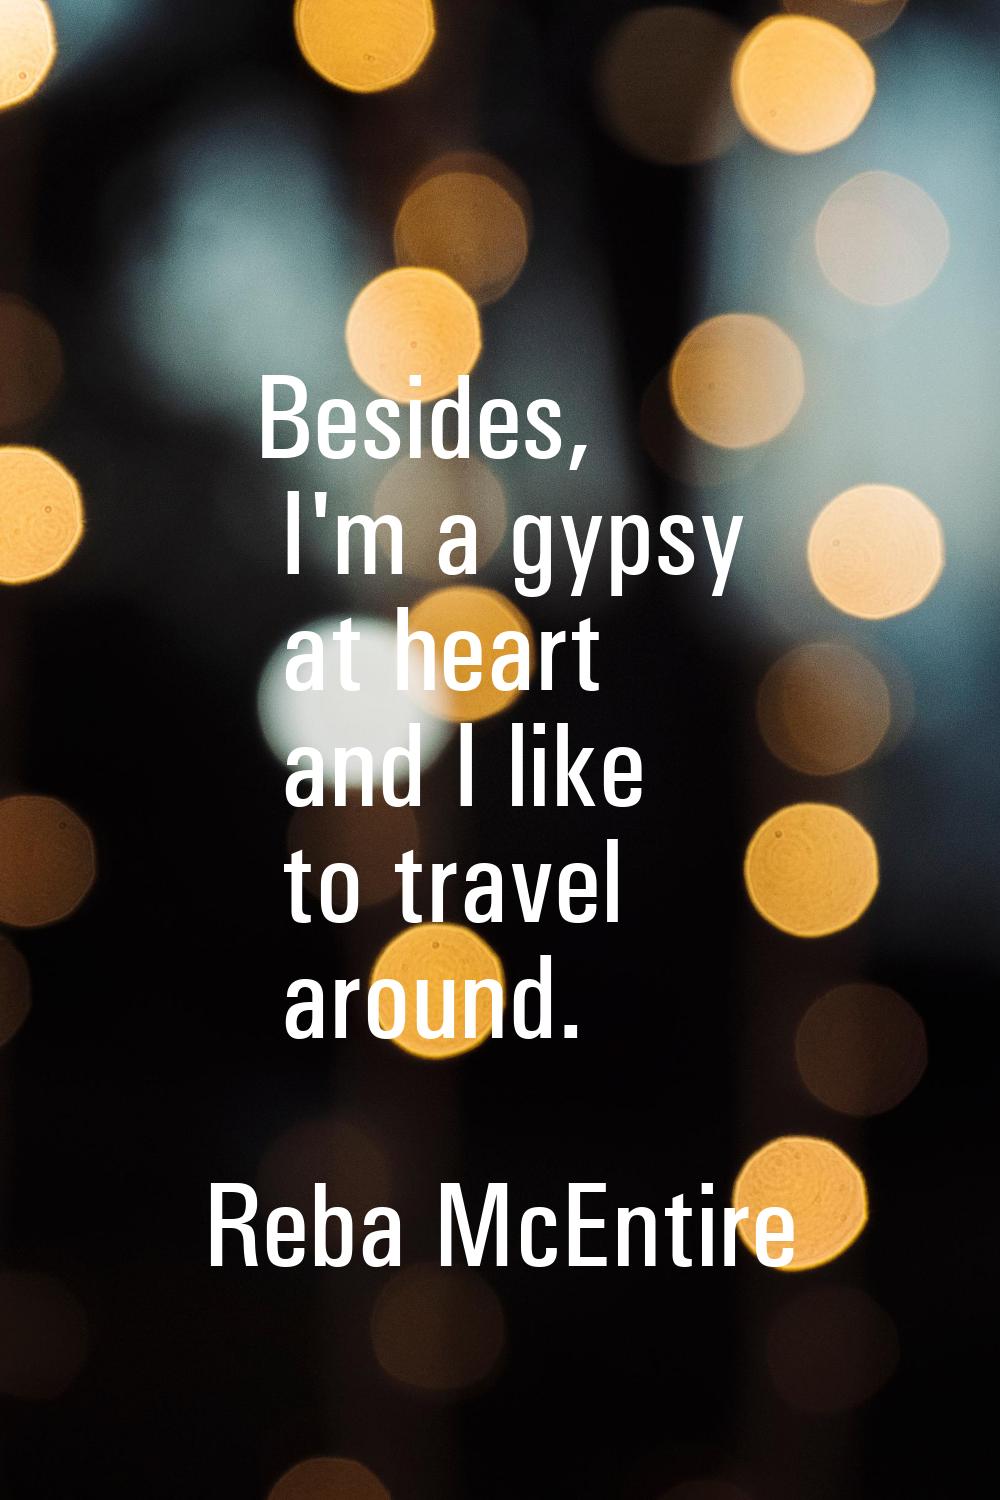 Besides, I'm a gypsy at heart and I like to travel around.